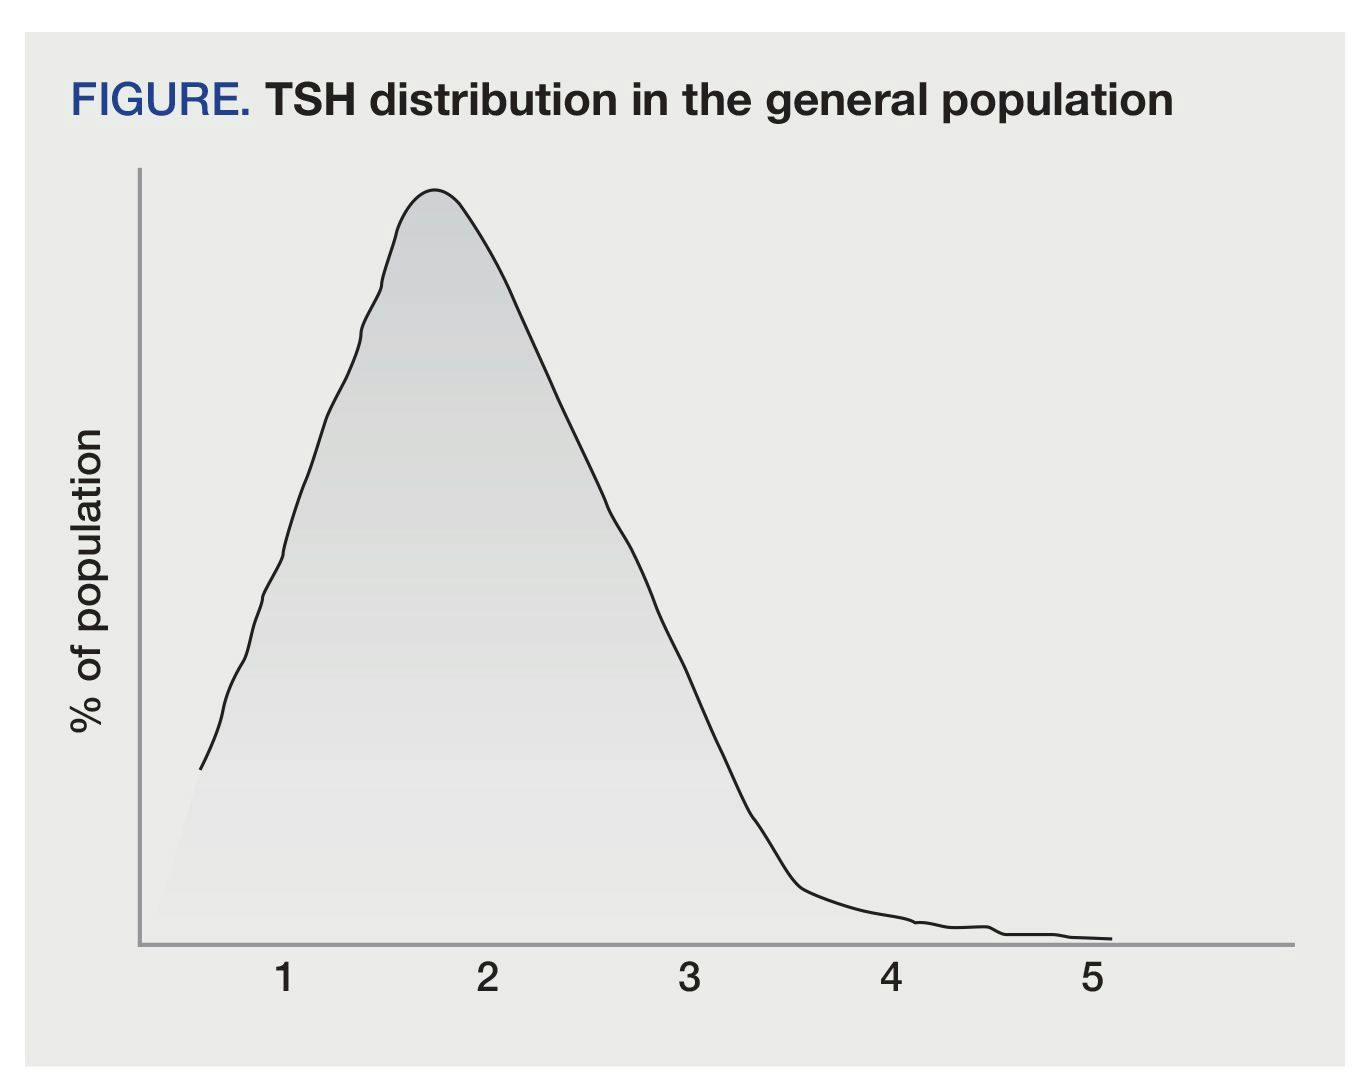 TSH distribution in the general population